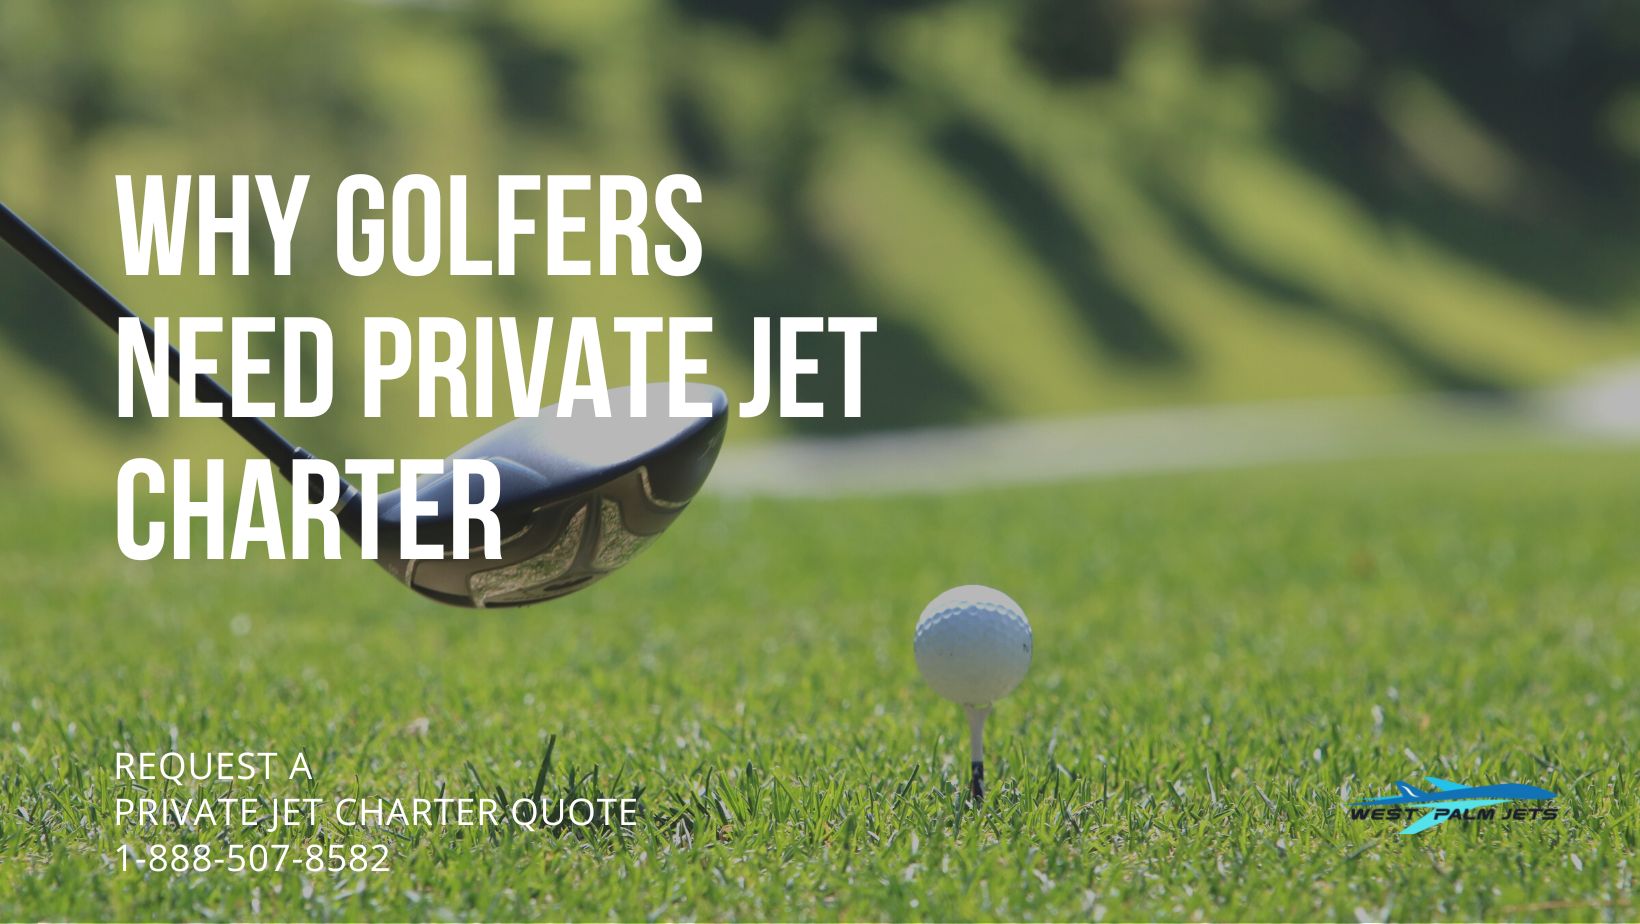 Why Golfers Need Private Jet Charter